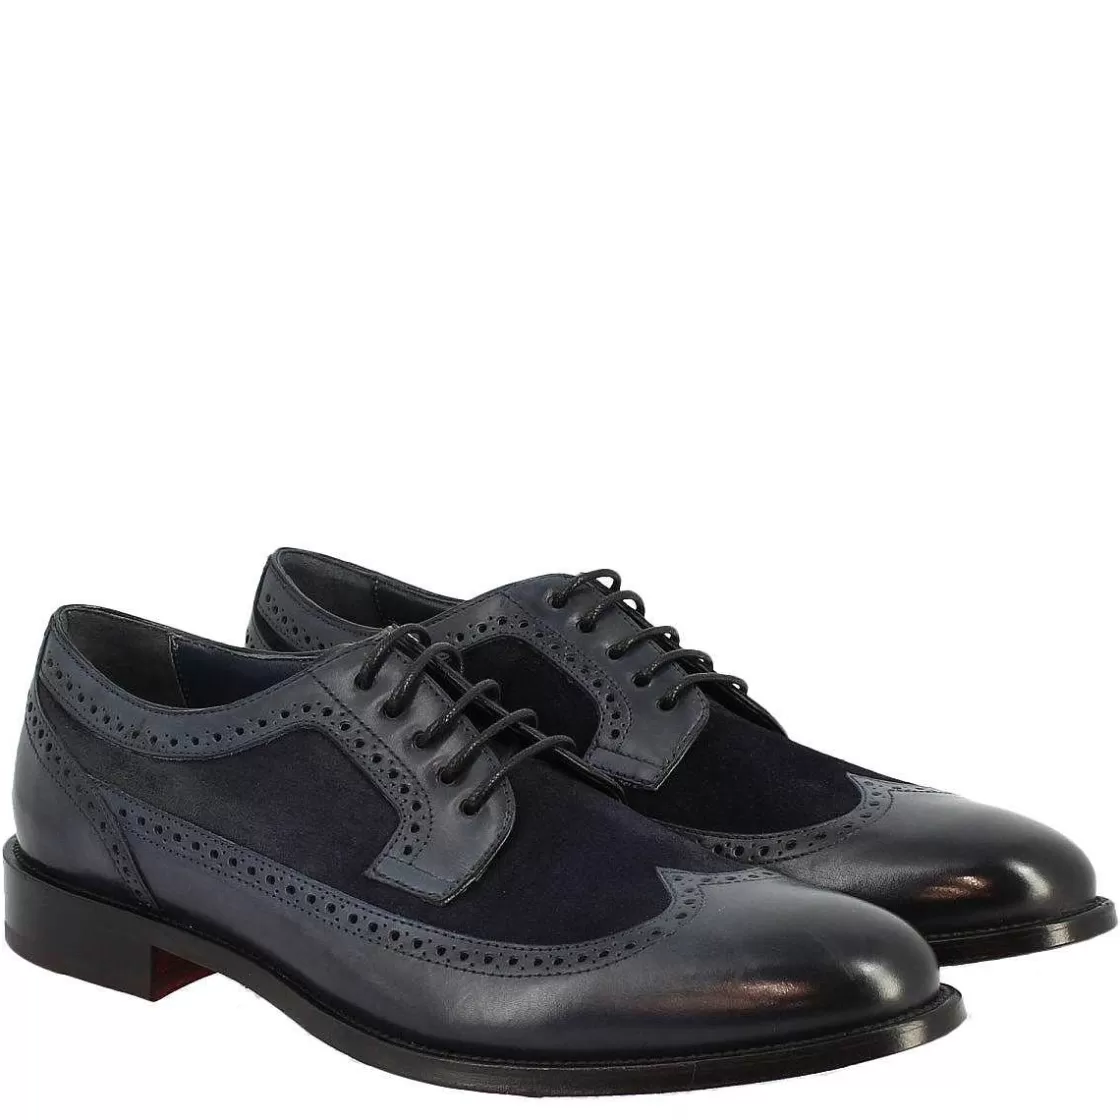 Leonardo Men'S Handmade Lace-Up Half Brogues Shoes In Blue Calfskin And Suede Best Sale